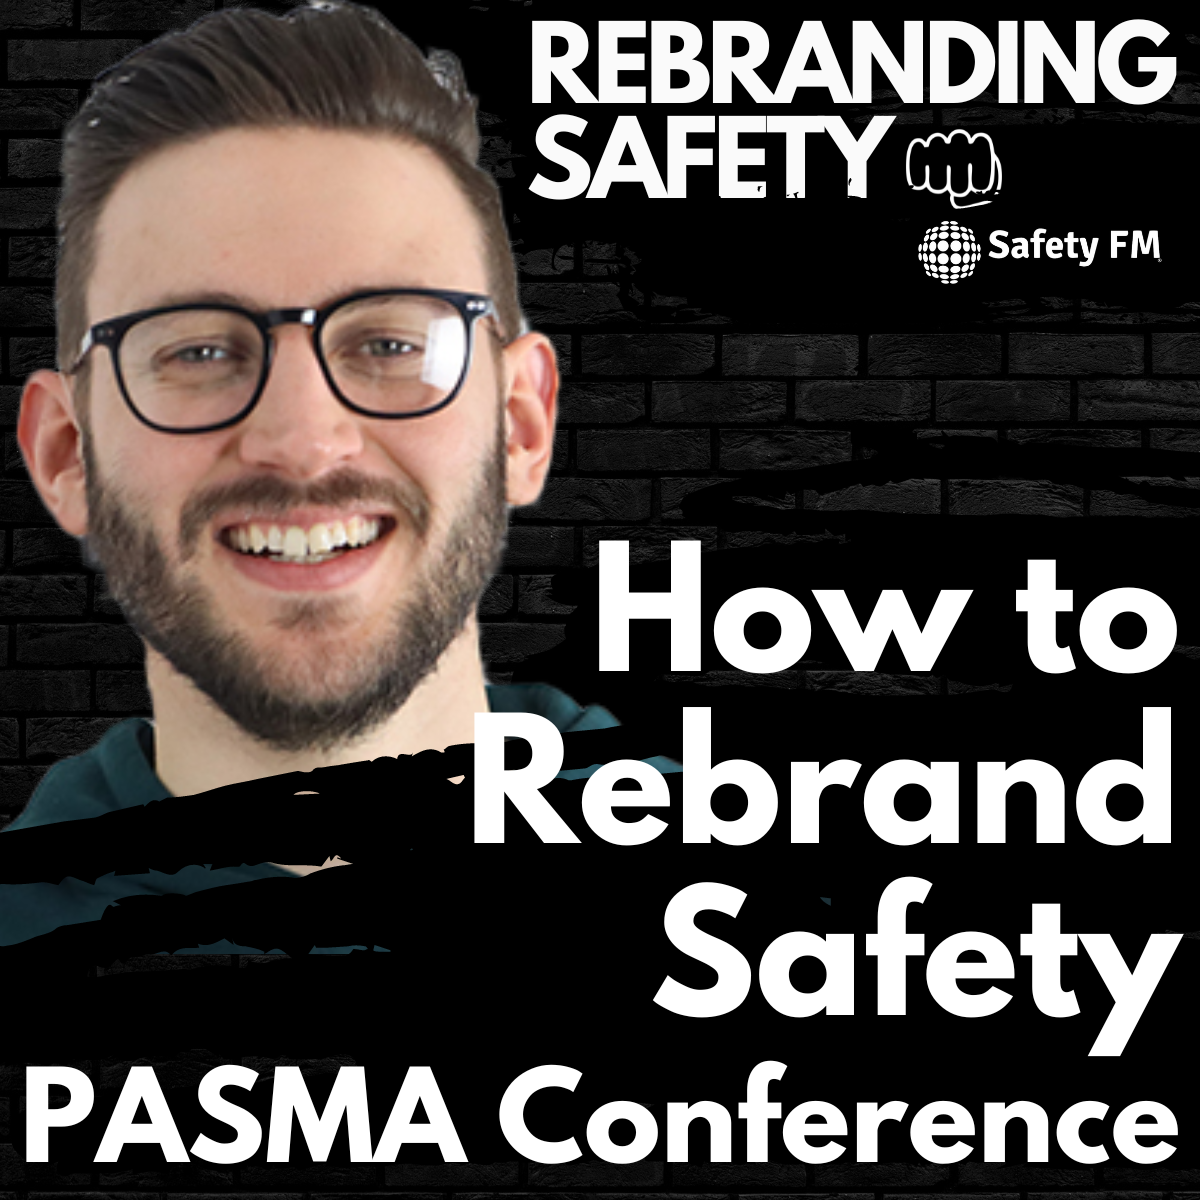 How to Rebrand Safety - At the PASMA Conference 2022